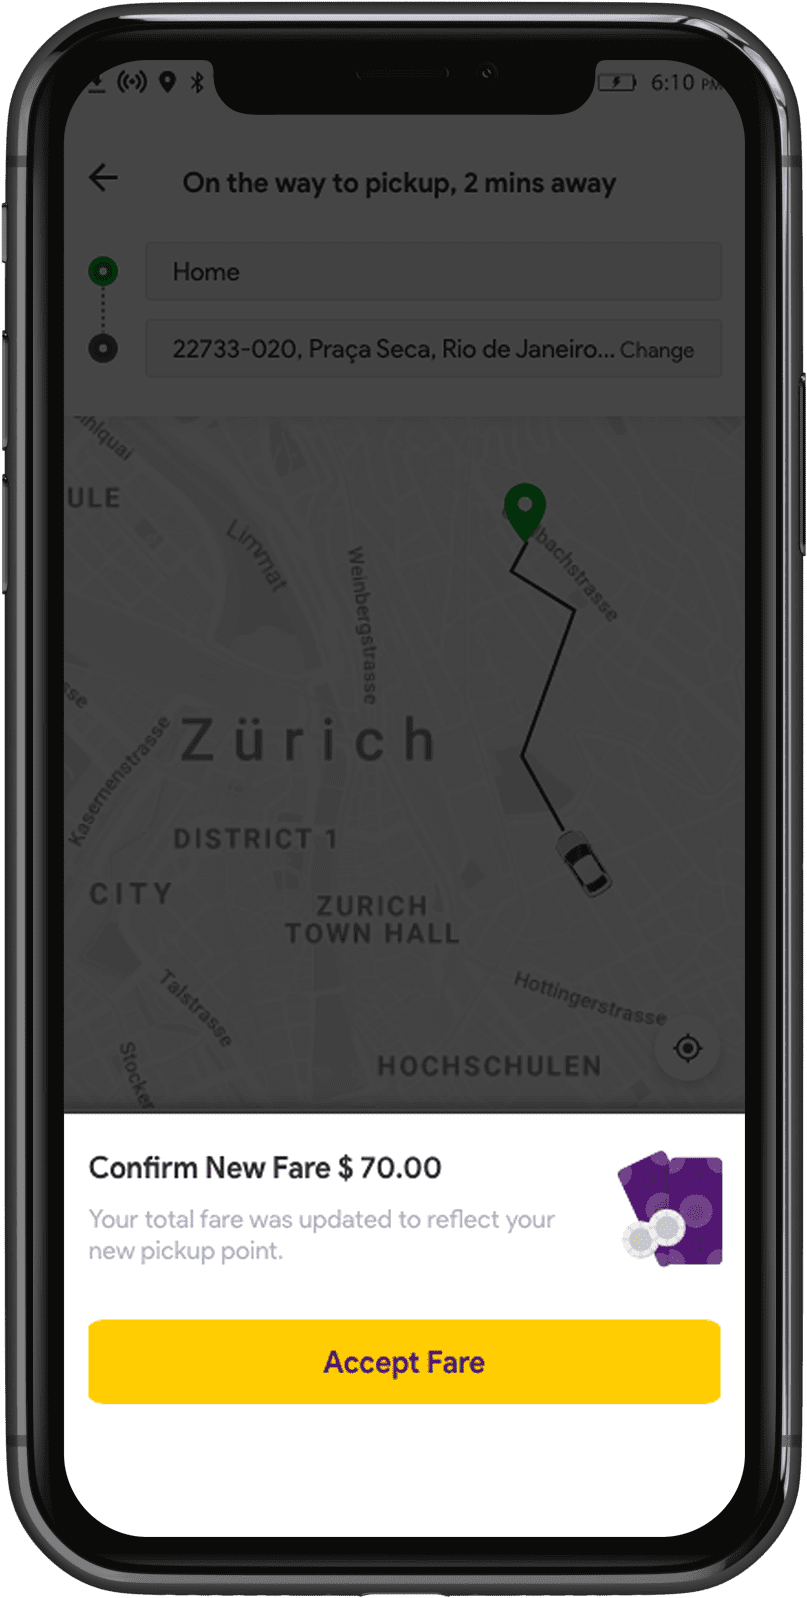 confirm-increased-fare-in-ride-sharing-customer-app.png